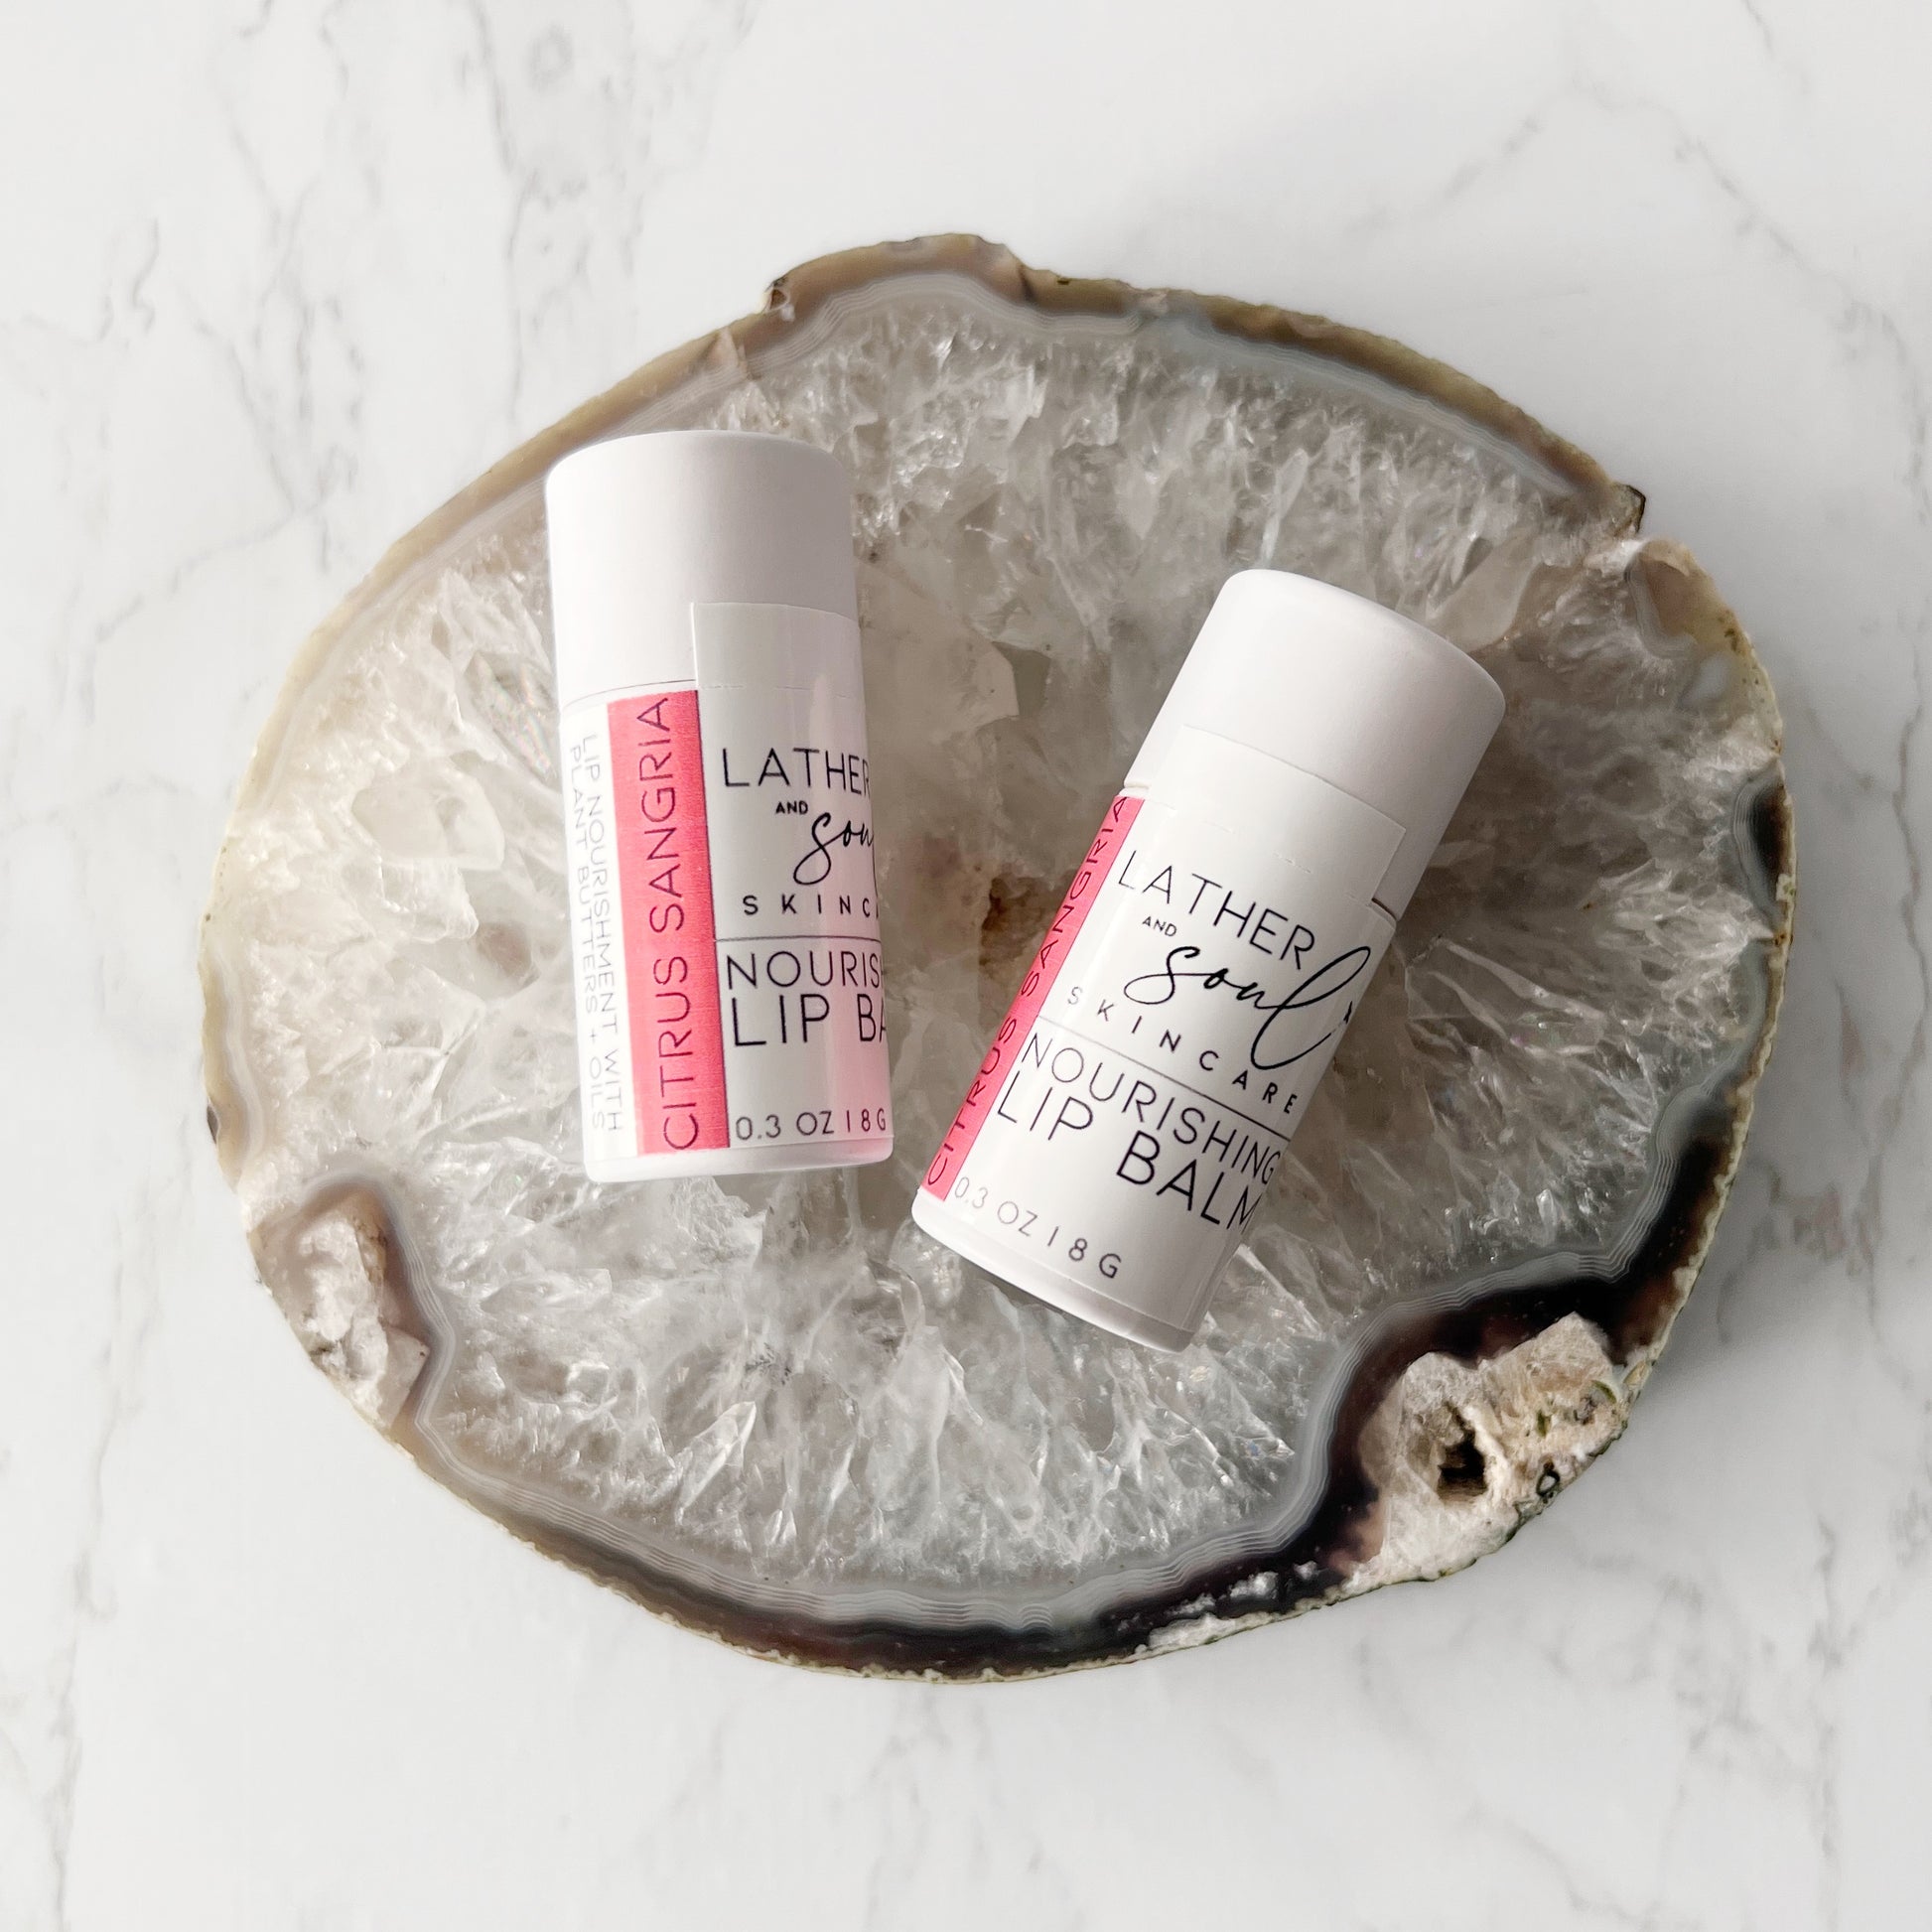 Best selling organic lip balm by Lather + Soul in Citrus Sangria flavor and in eco friendly paperboard tube